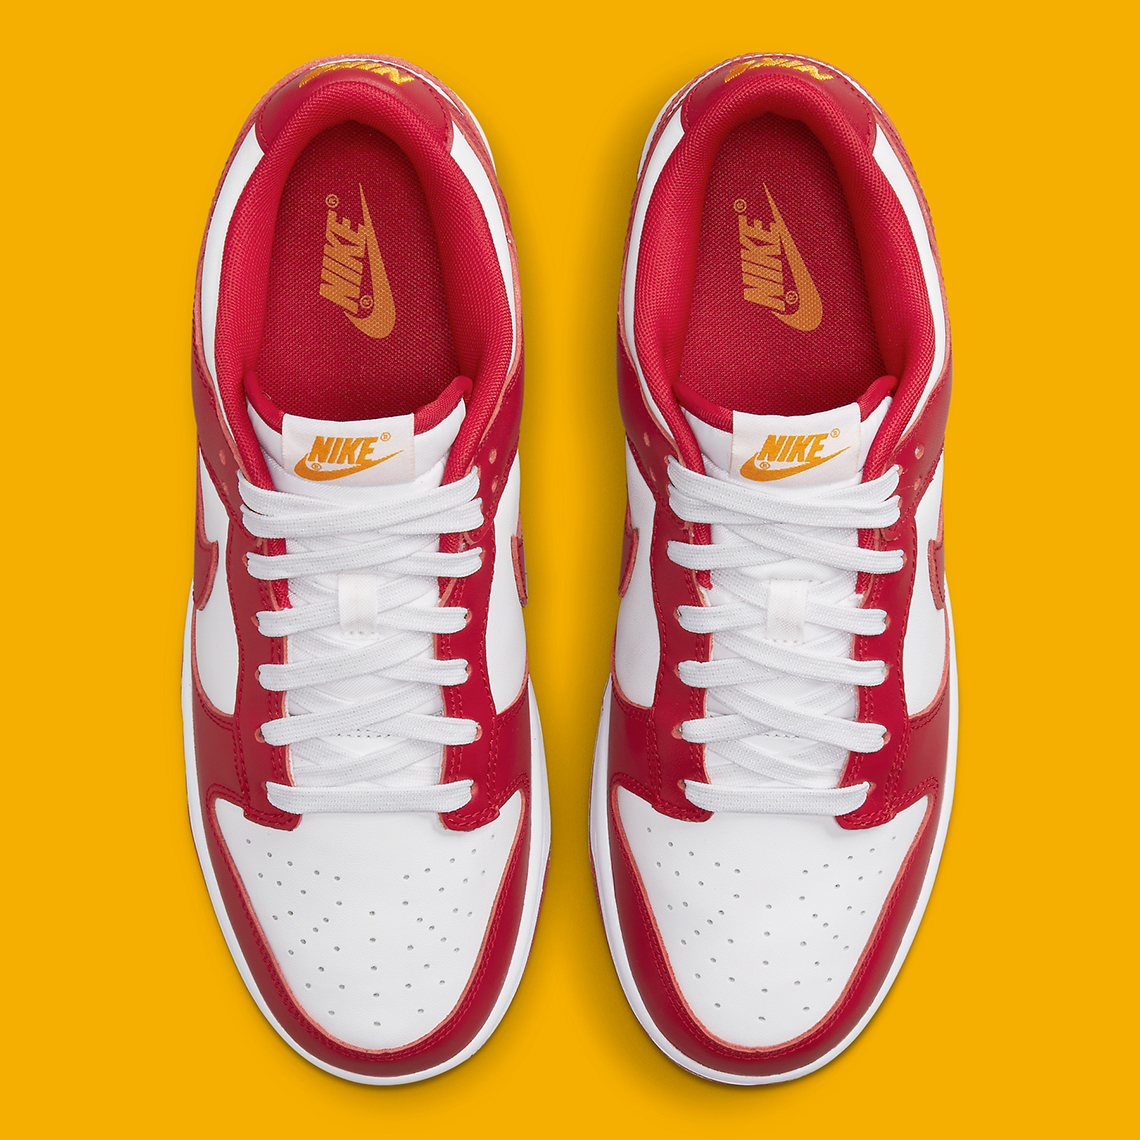 red and yellow dunks